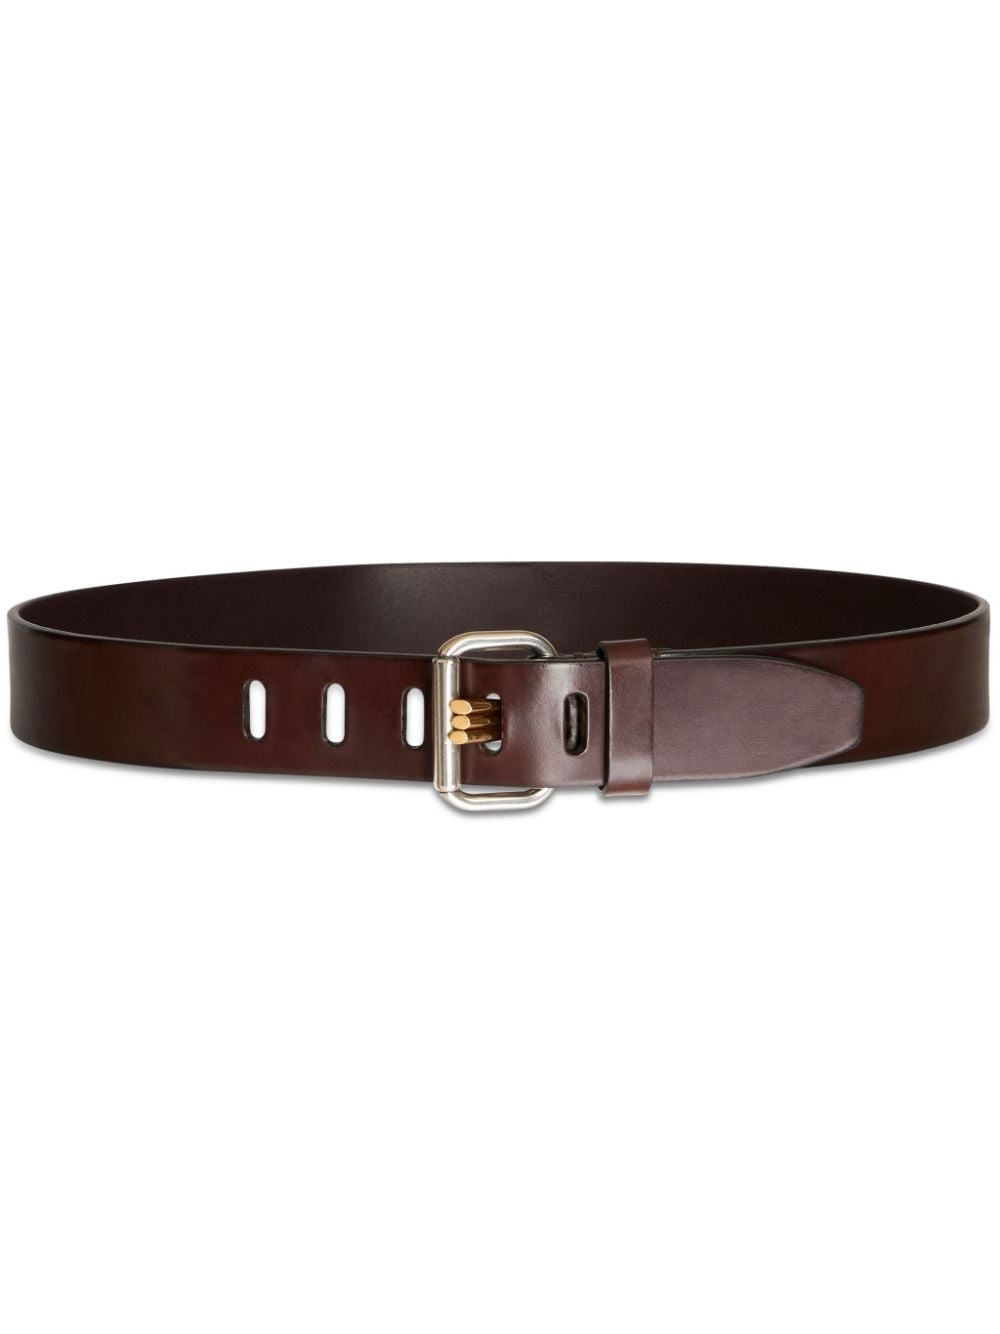 silver-tone leather belt - 1